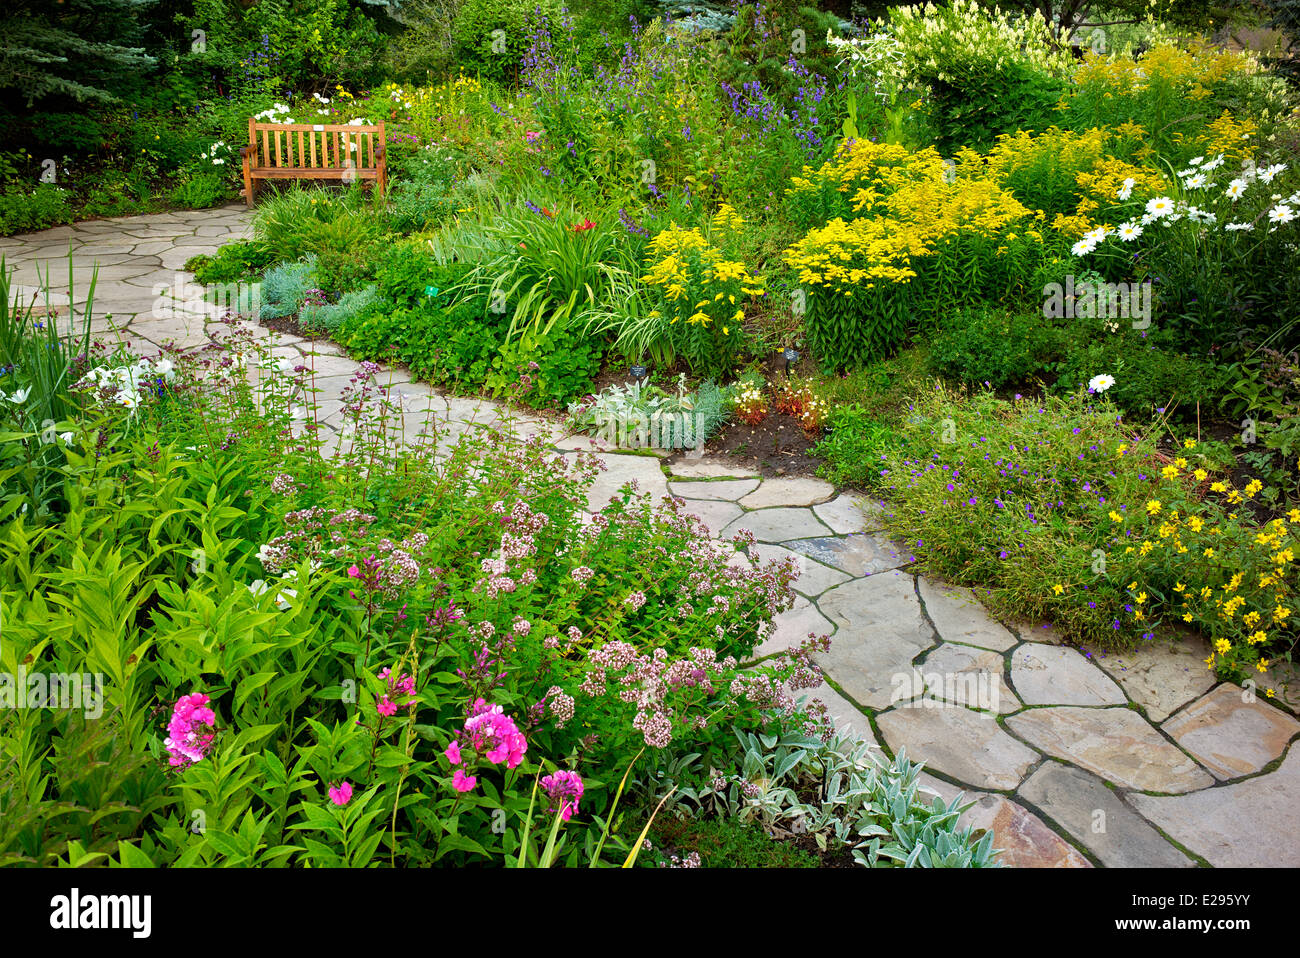 Flower garden with foreground sedums and stone path in Betty Ford Alpine Gardens. Vale Colorado Stock Photo